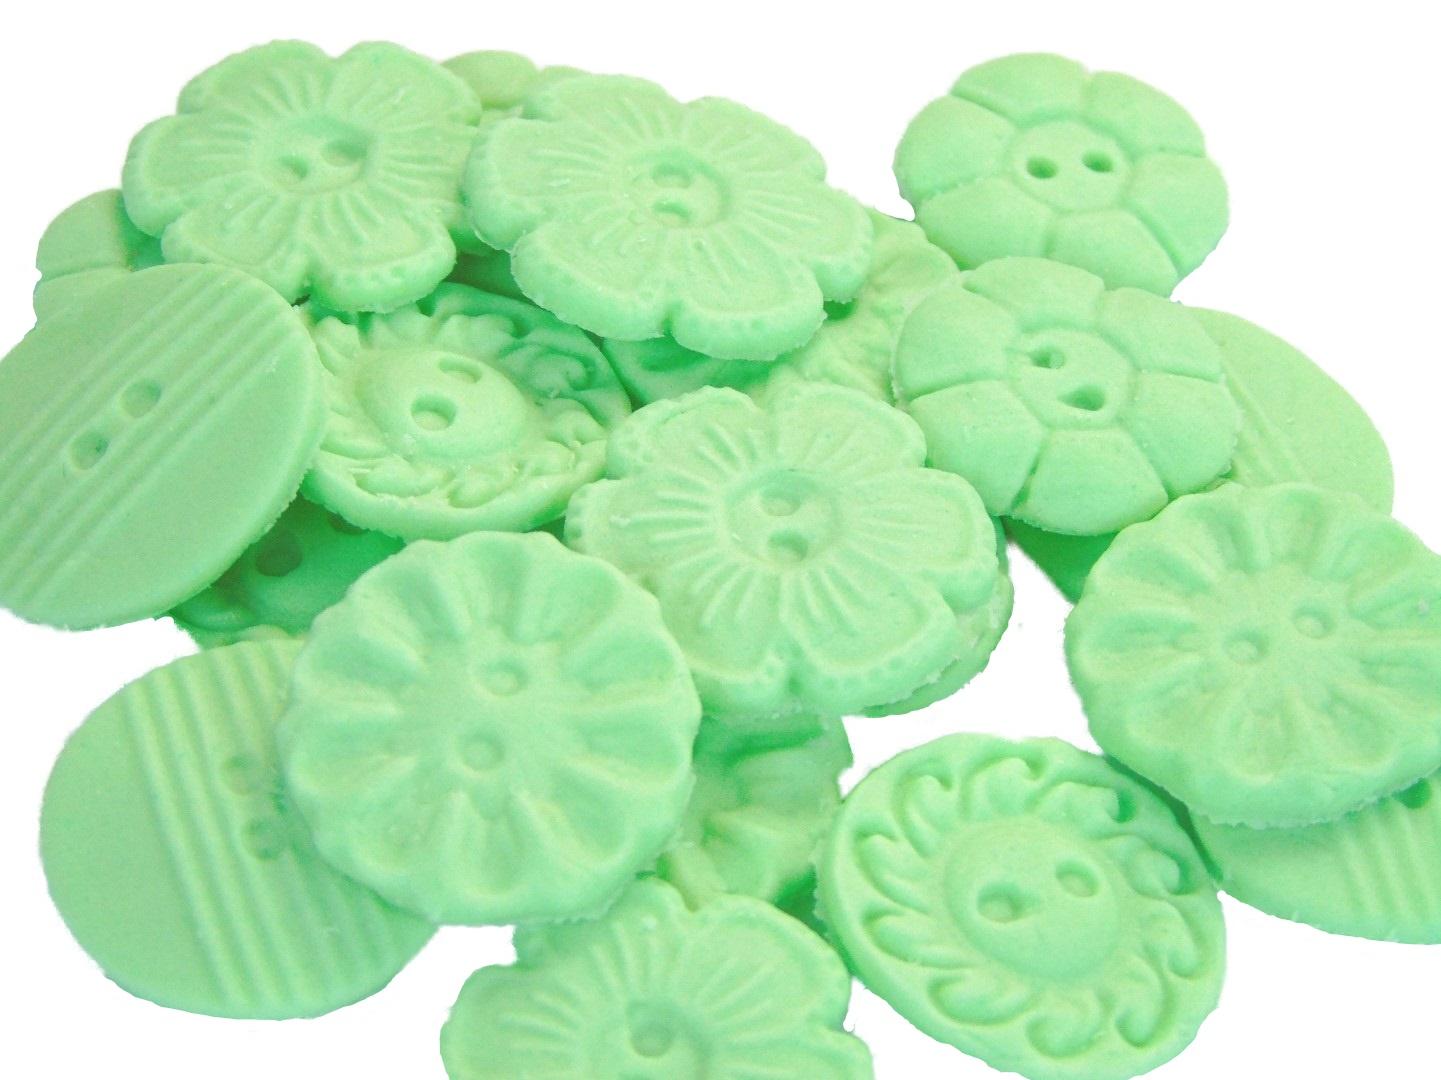 18 Edible Mixed Shaped Green Coloured Buttons Vegan Cupcake Toppers